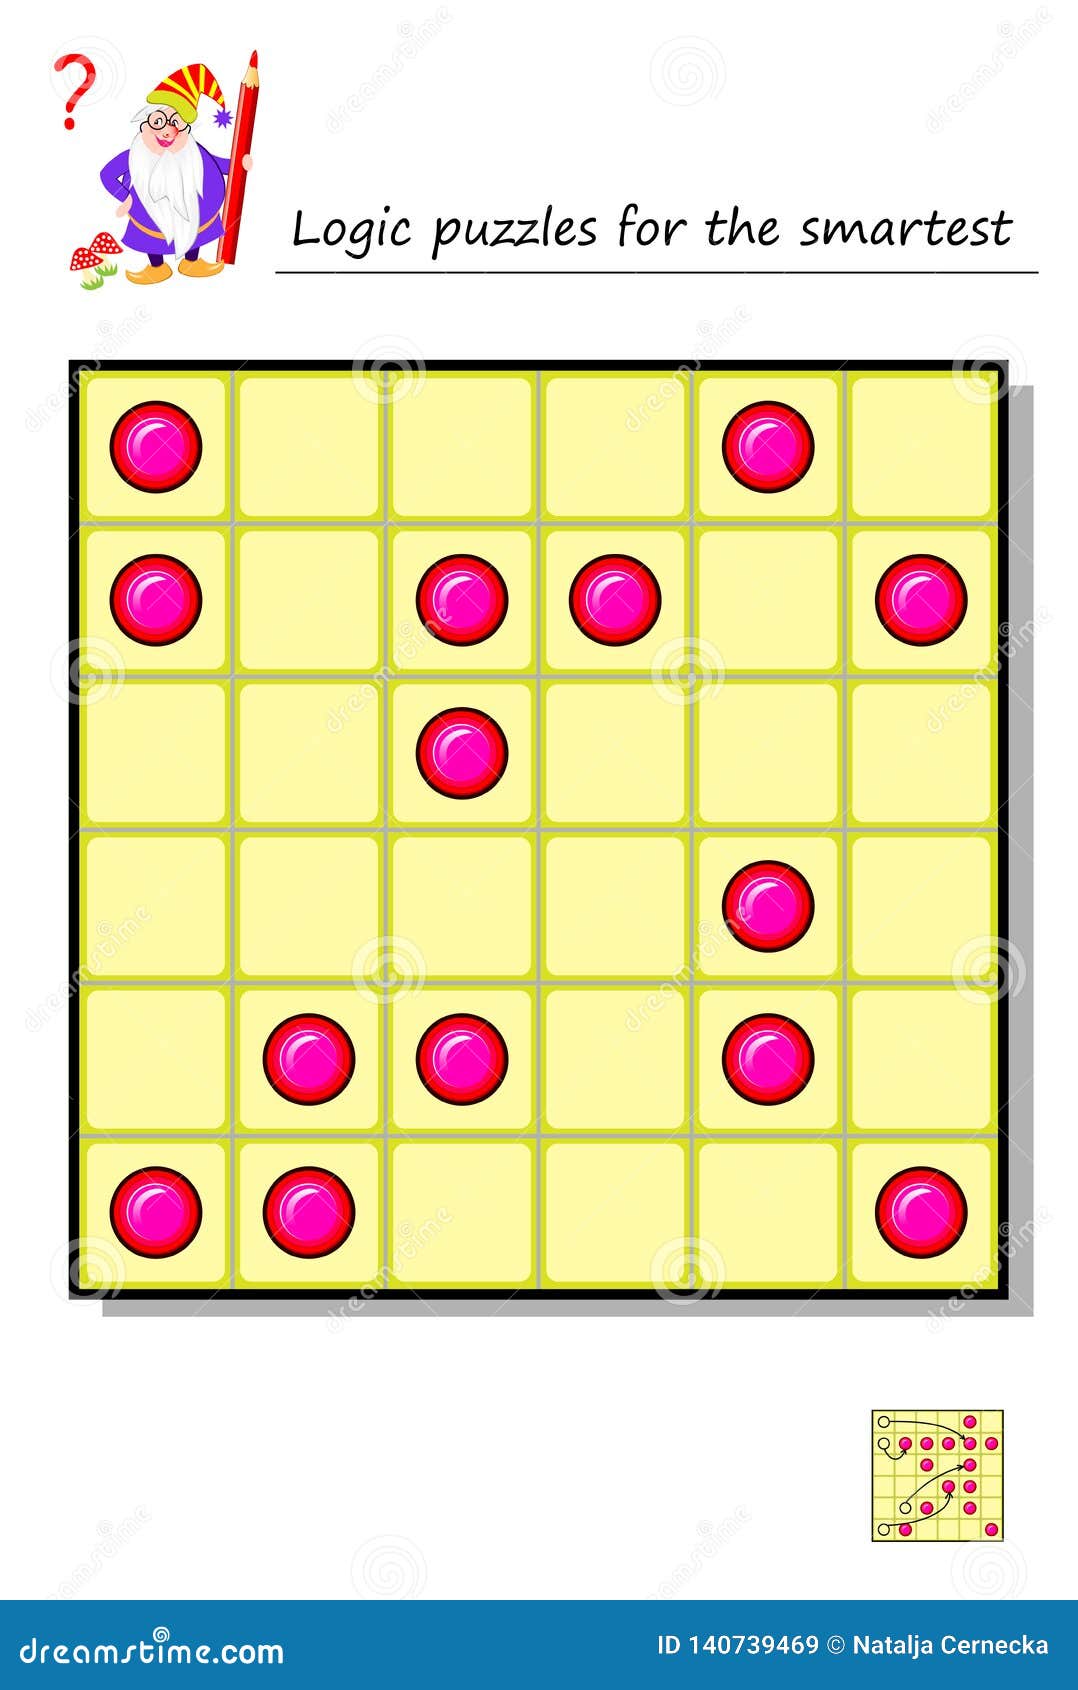 Logic Puzzle Game for the Smartest. Move 4 Pieces so To Get 1 Horizontal, 1 Vertical and 2 Diagonal with 5 Points in Stock - Illustration guess, activity: 140739469